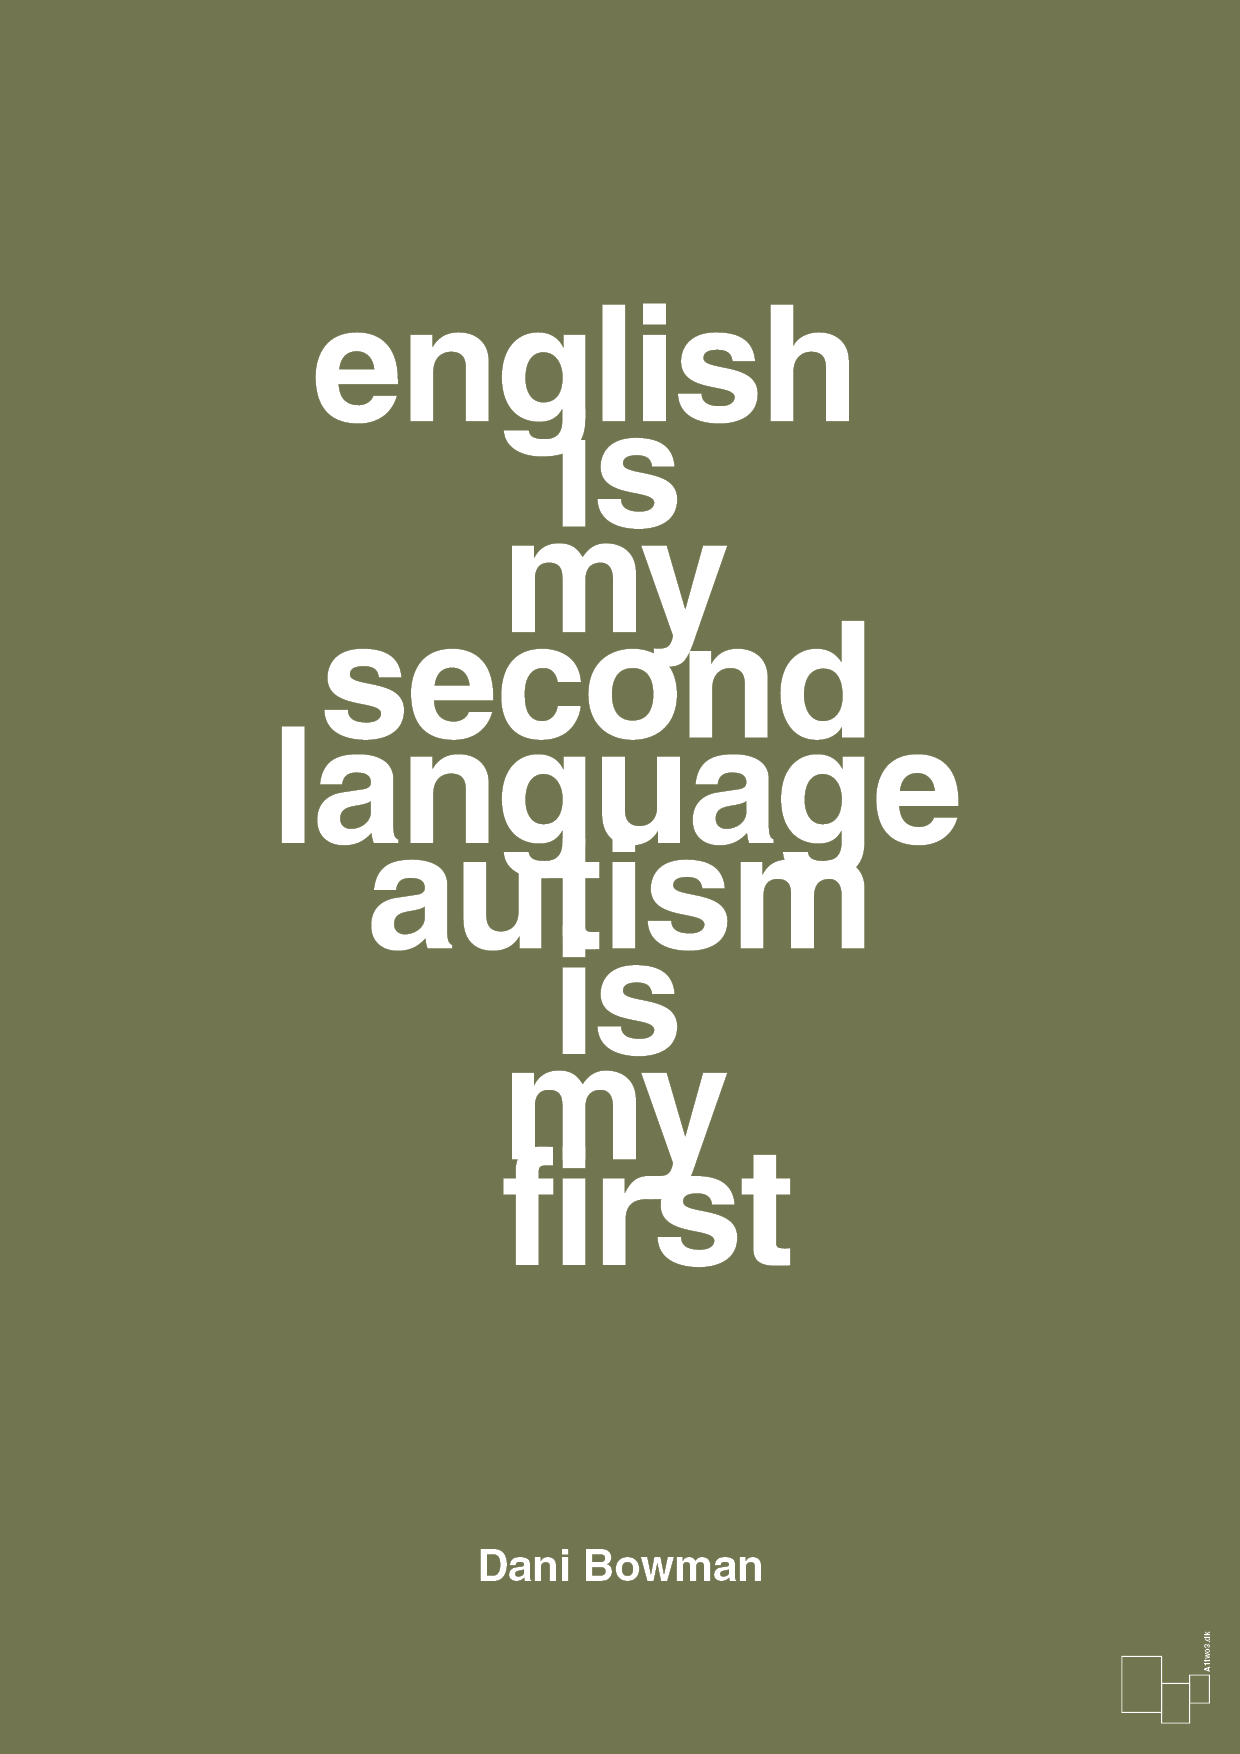 english is my second language autism is my first - Plakat med Samfund i Secret Meadow